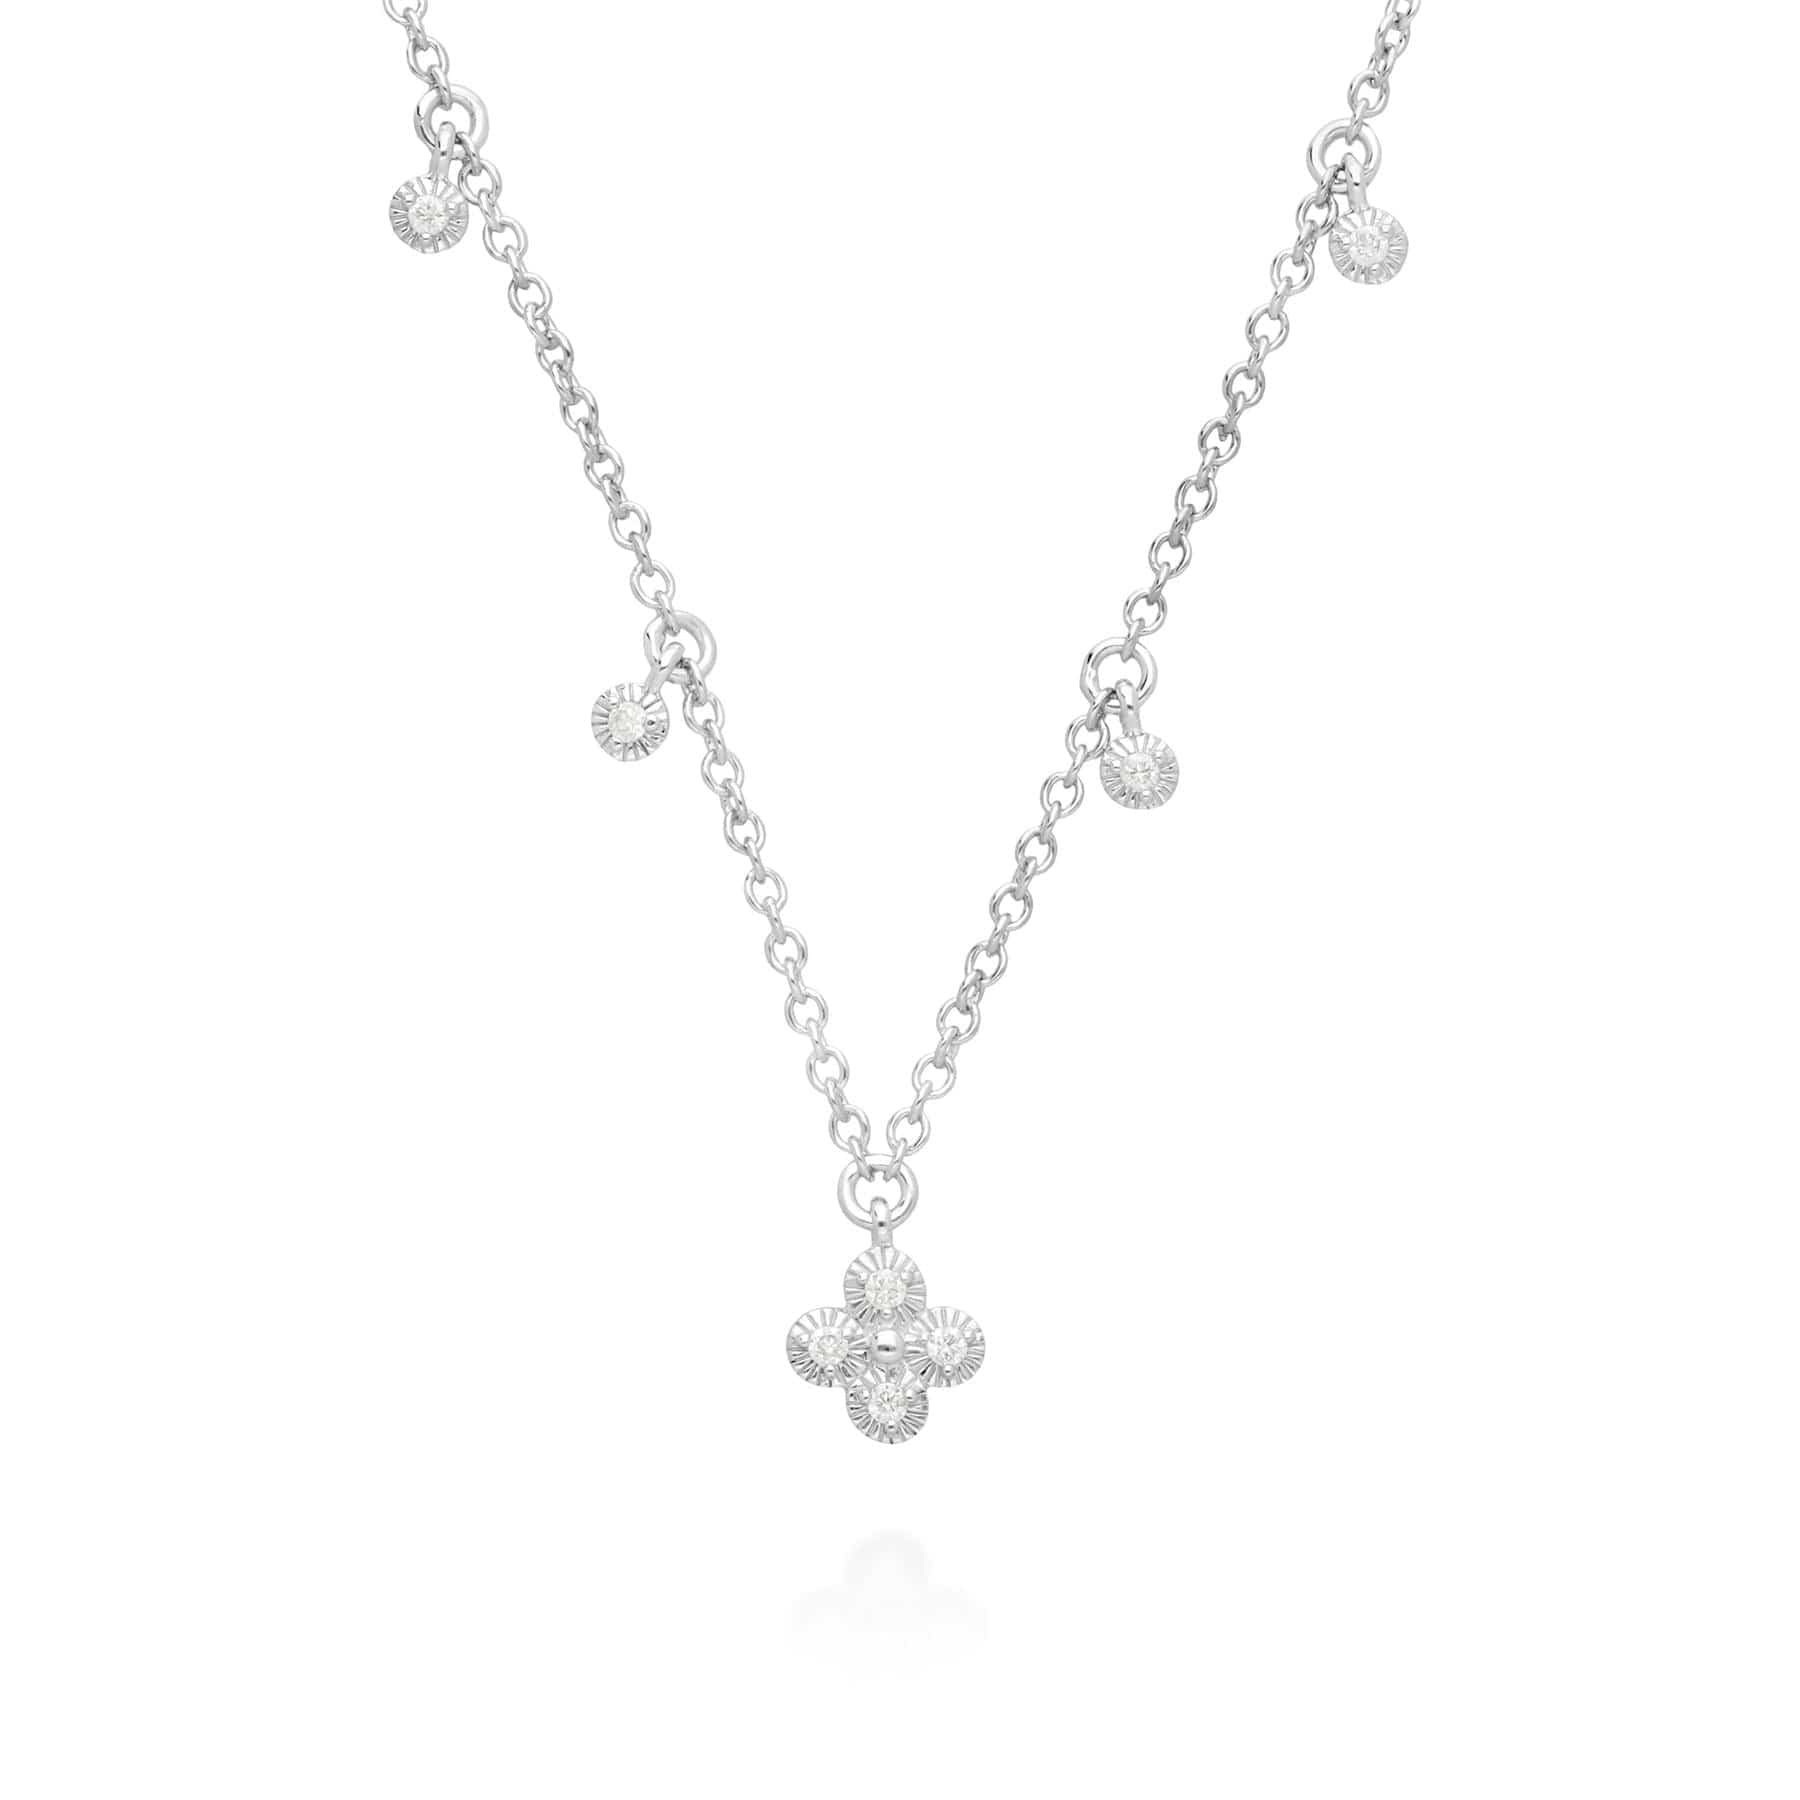 162N0034019 Diamond Flowers Choker Charm Necklace in 9ct White Gold 1